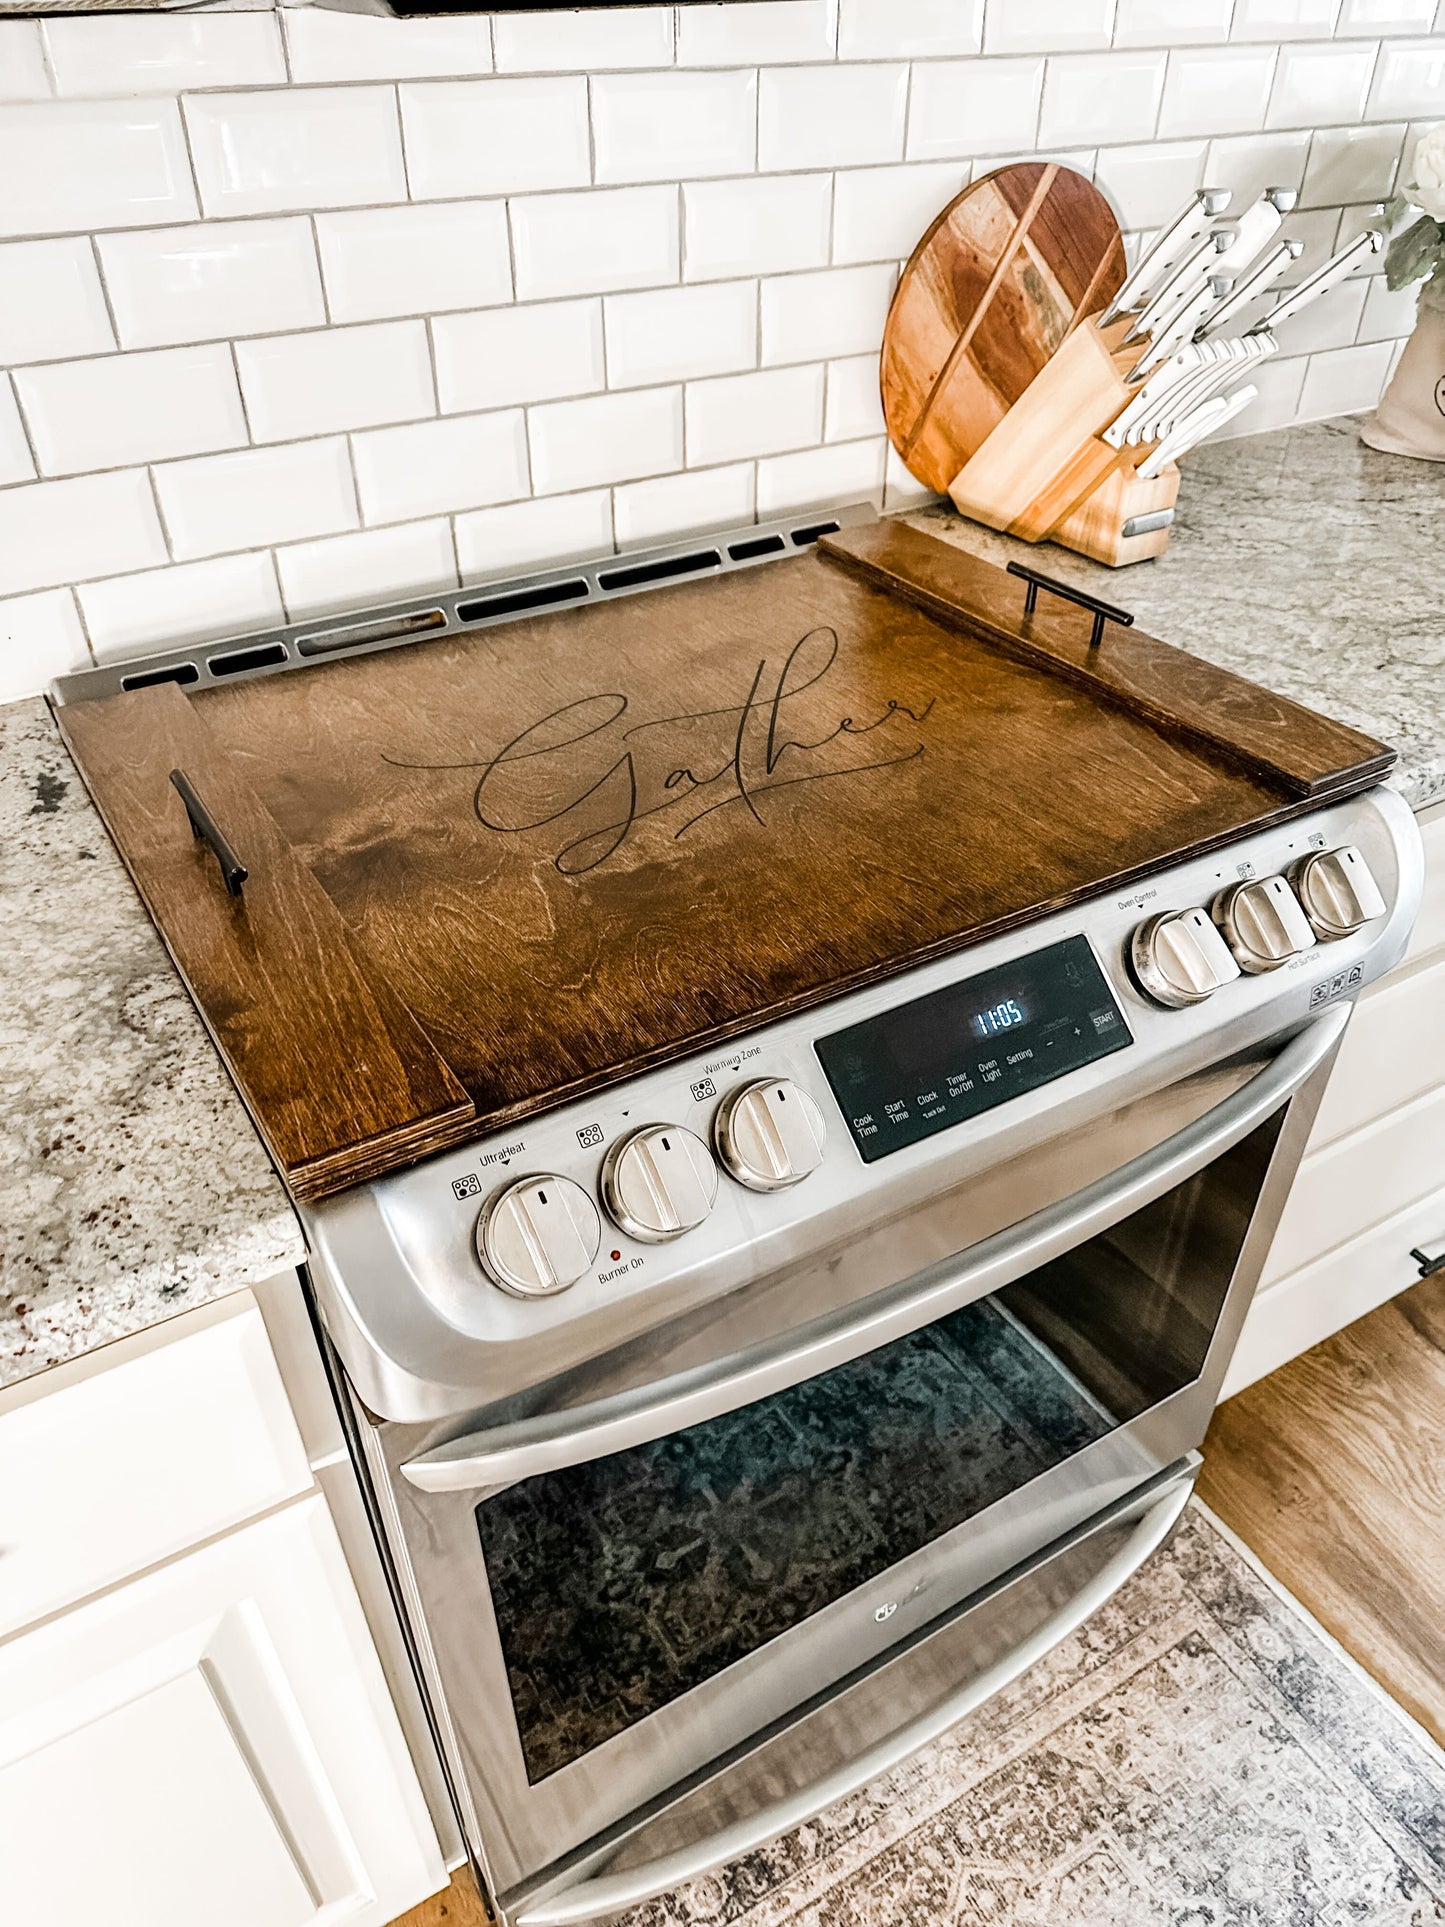 Wooden Cutting Board Stovetop Cover. Engraved Oven Cover. Shop Now!